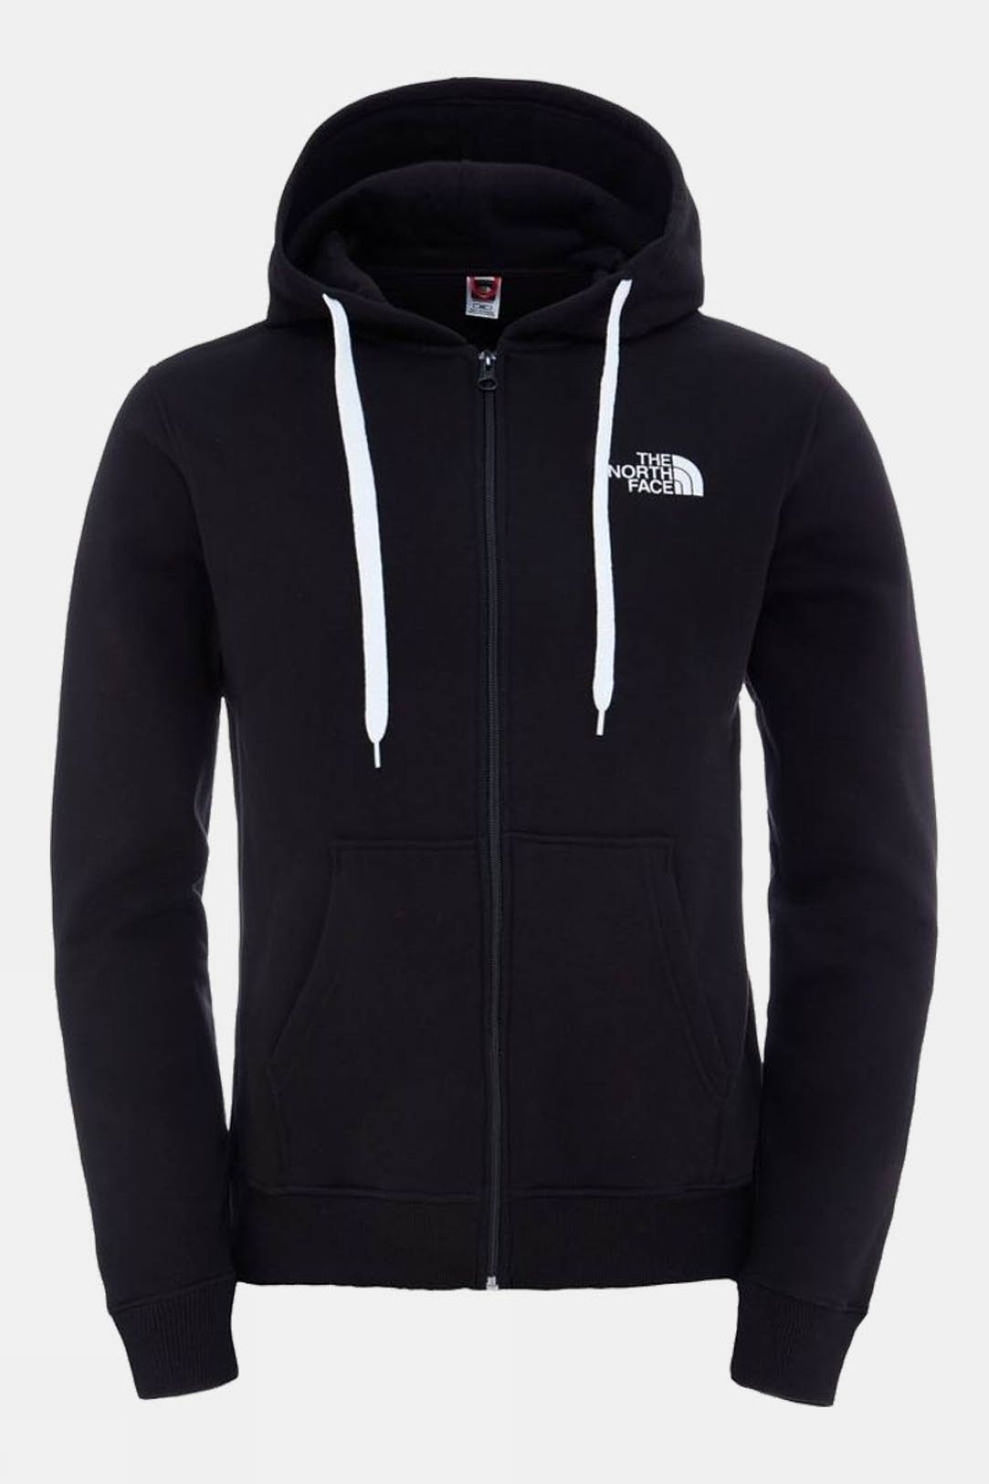 The North Face Mens Open Gate Full Zip Hoodie Jacket